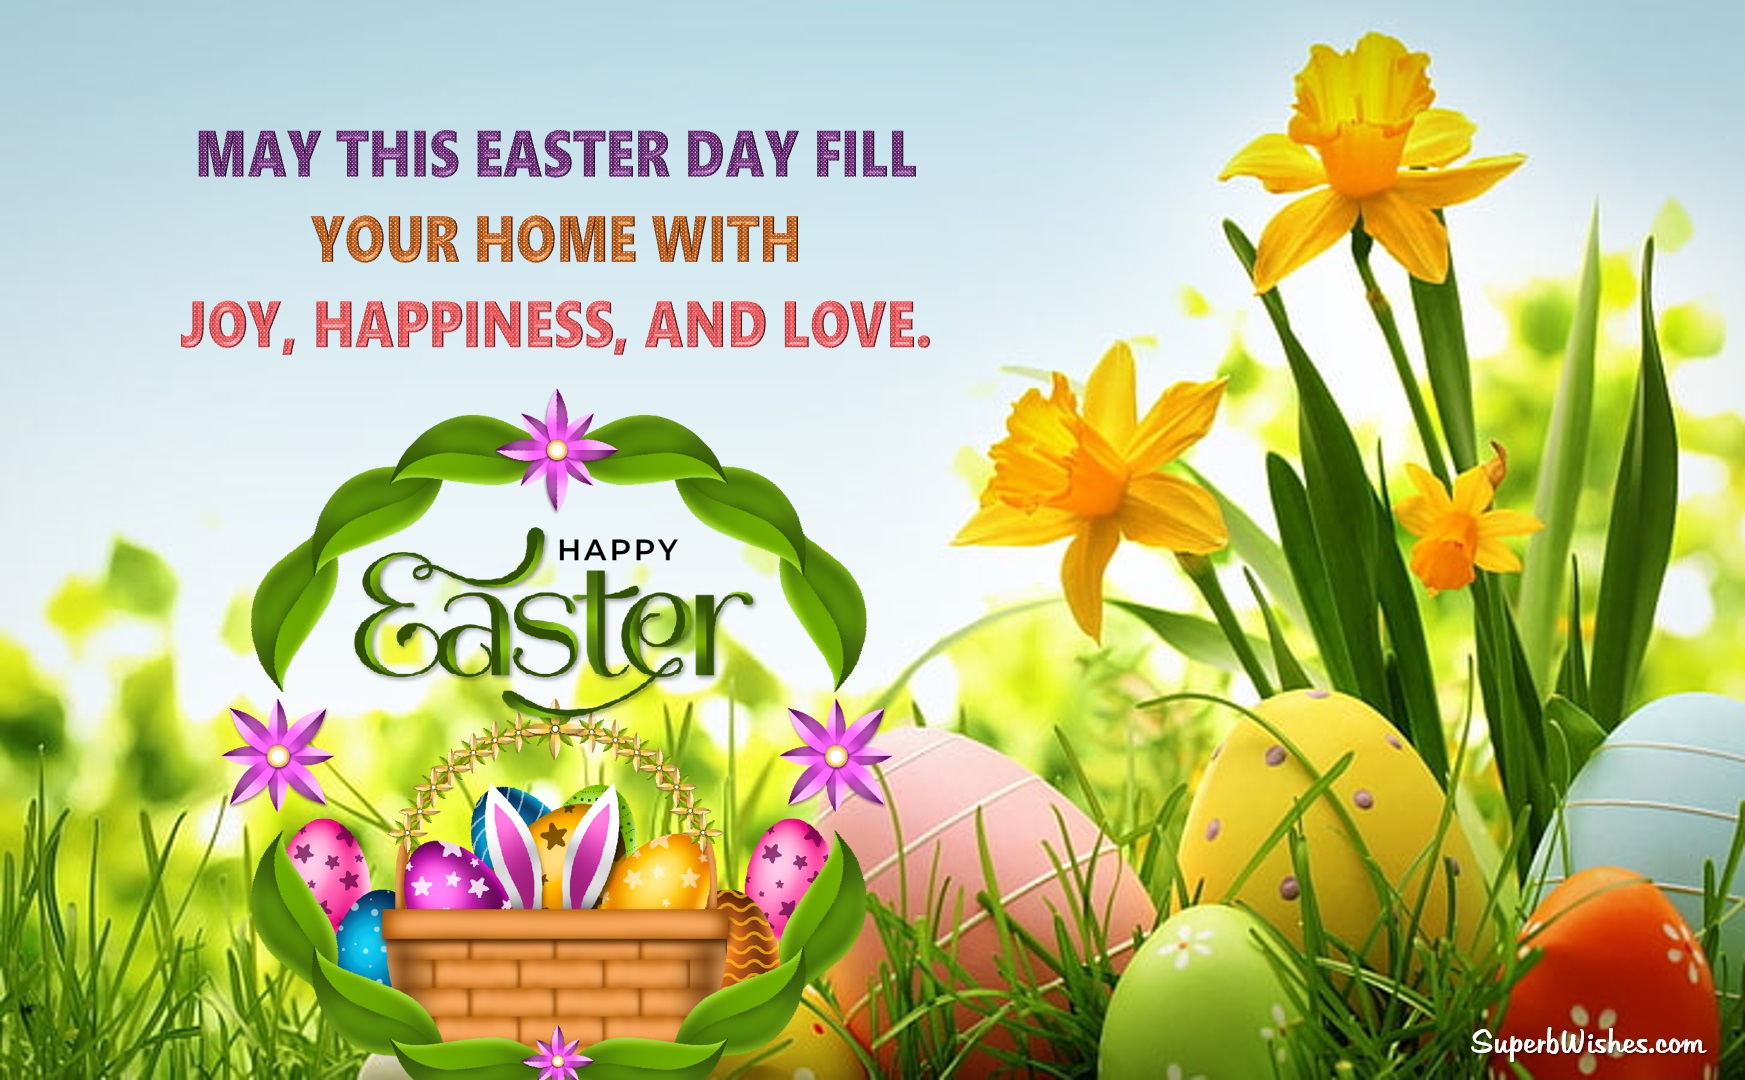 Easter Images Free Download by SuperbWishes